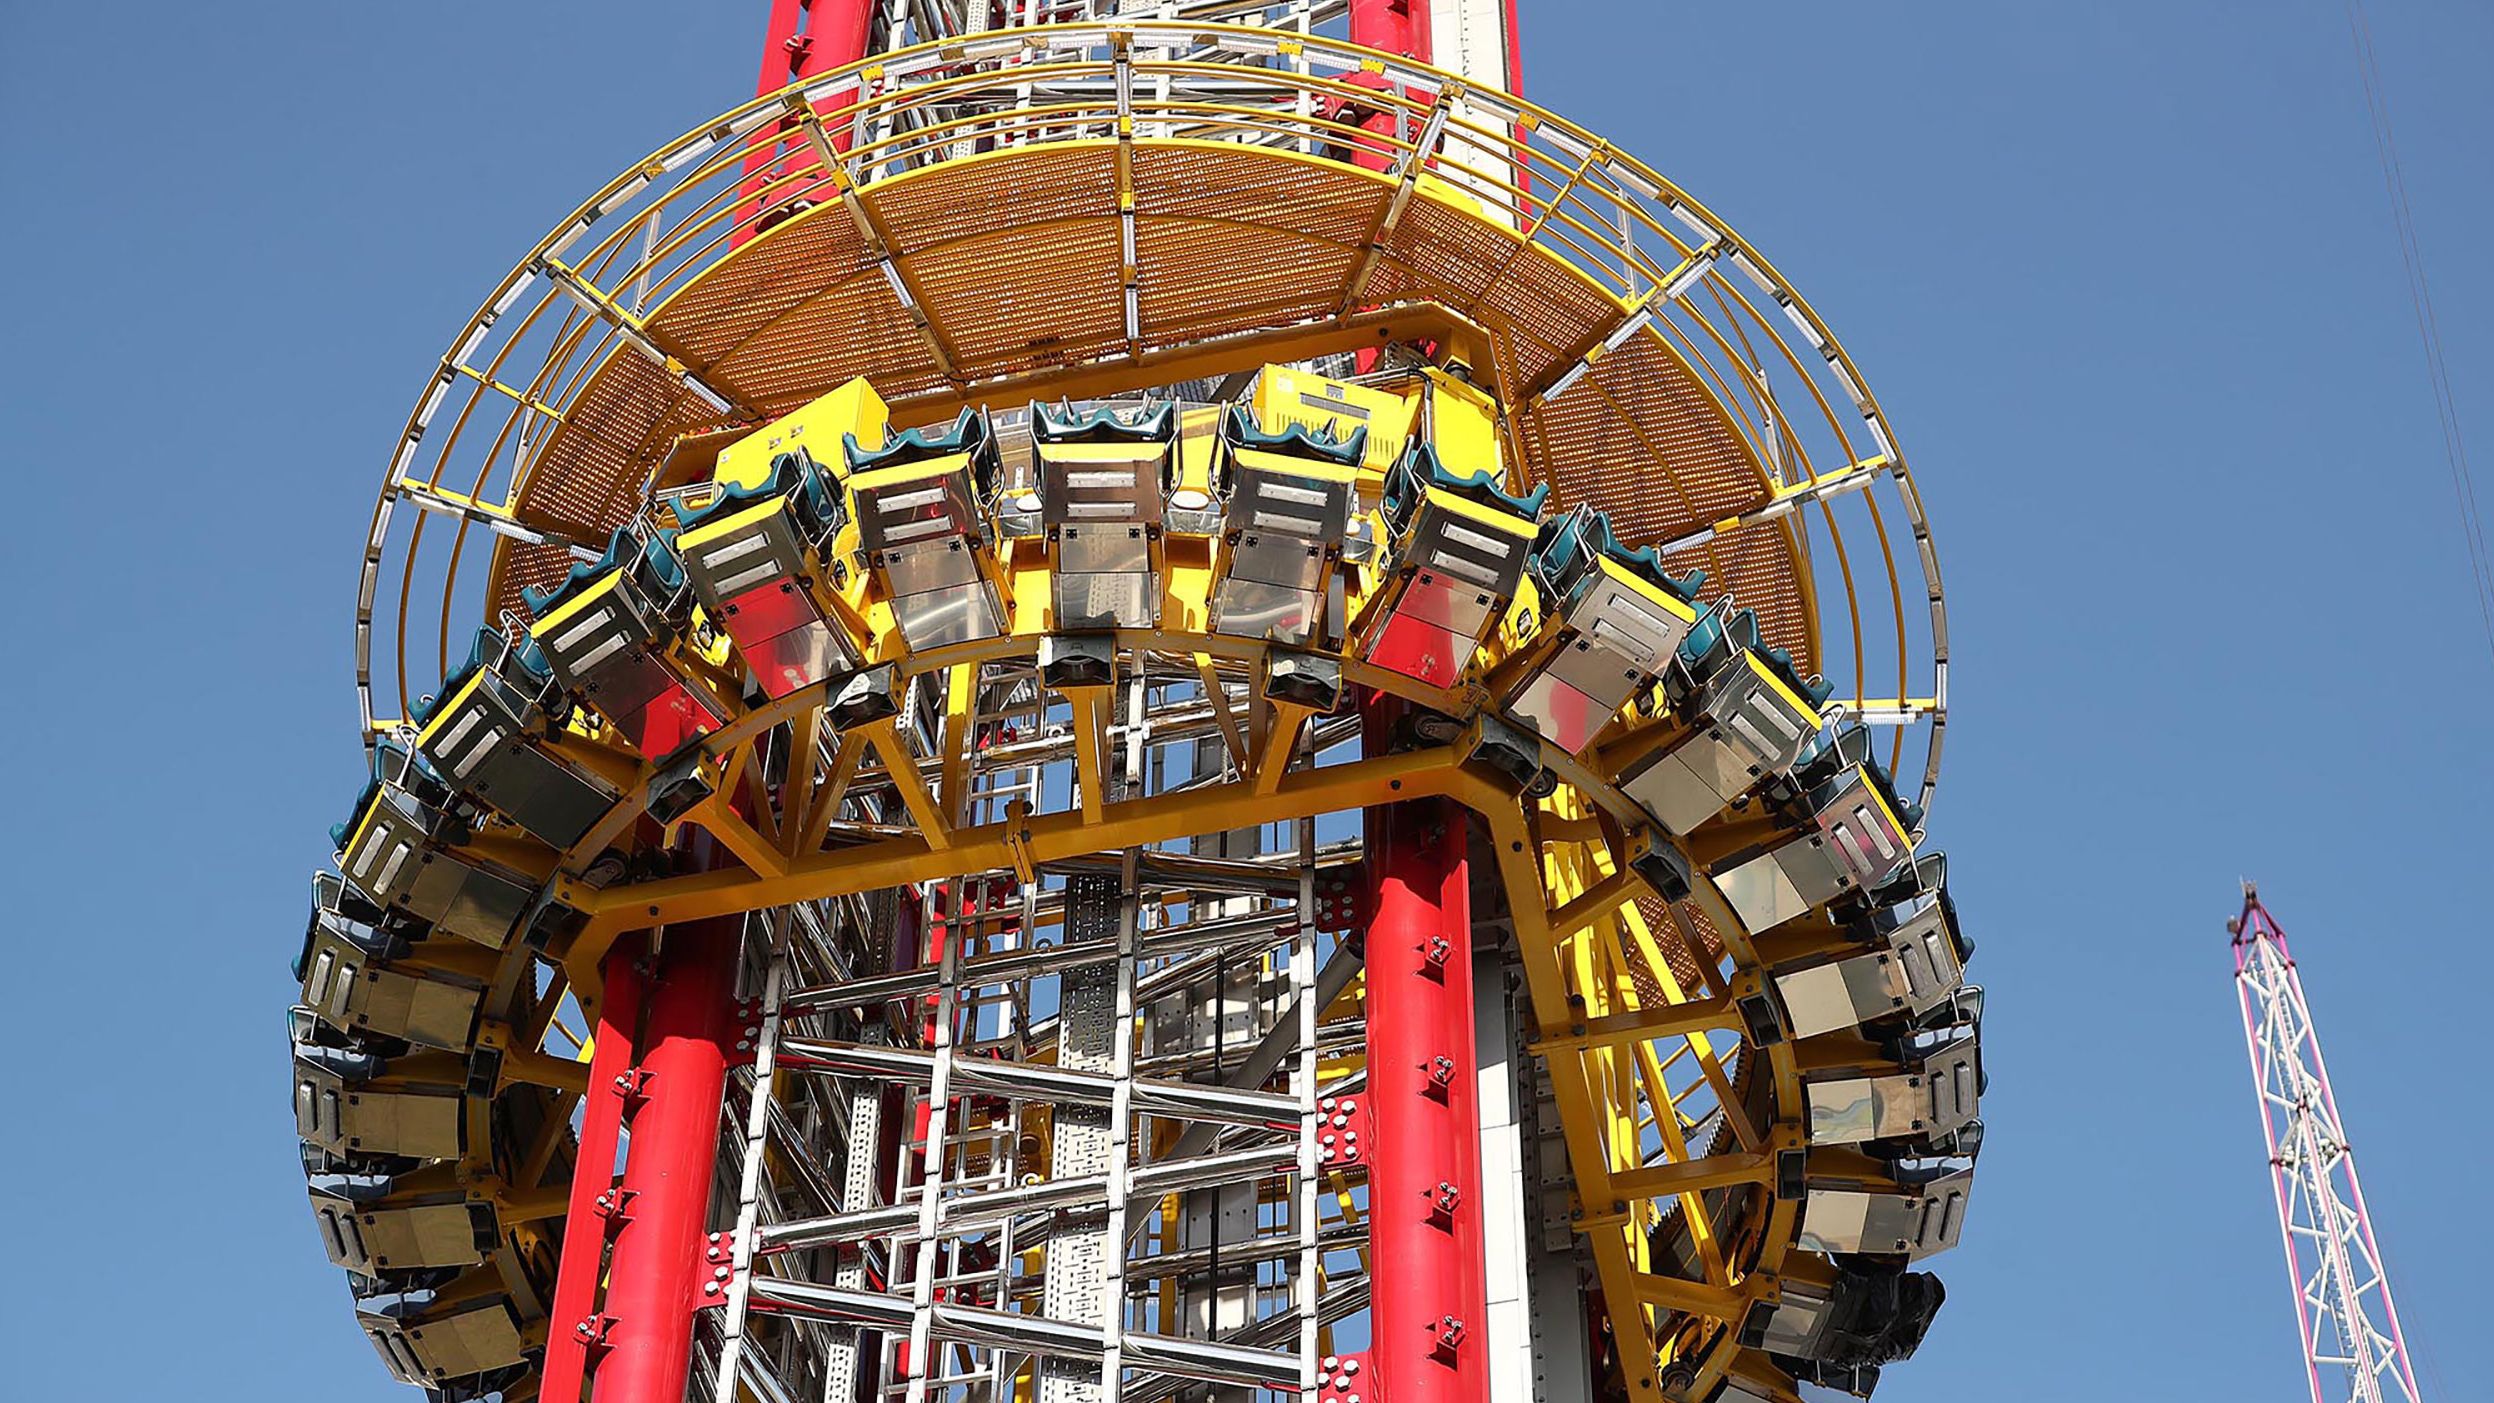 The Orlando FreeFall ride, shown here in March, has been closed since Tyre Sampson's death.